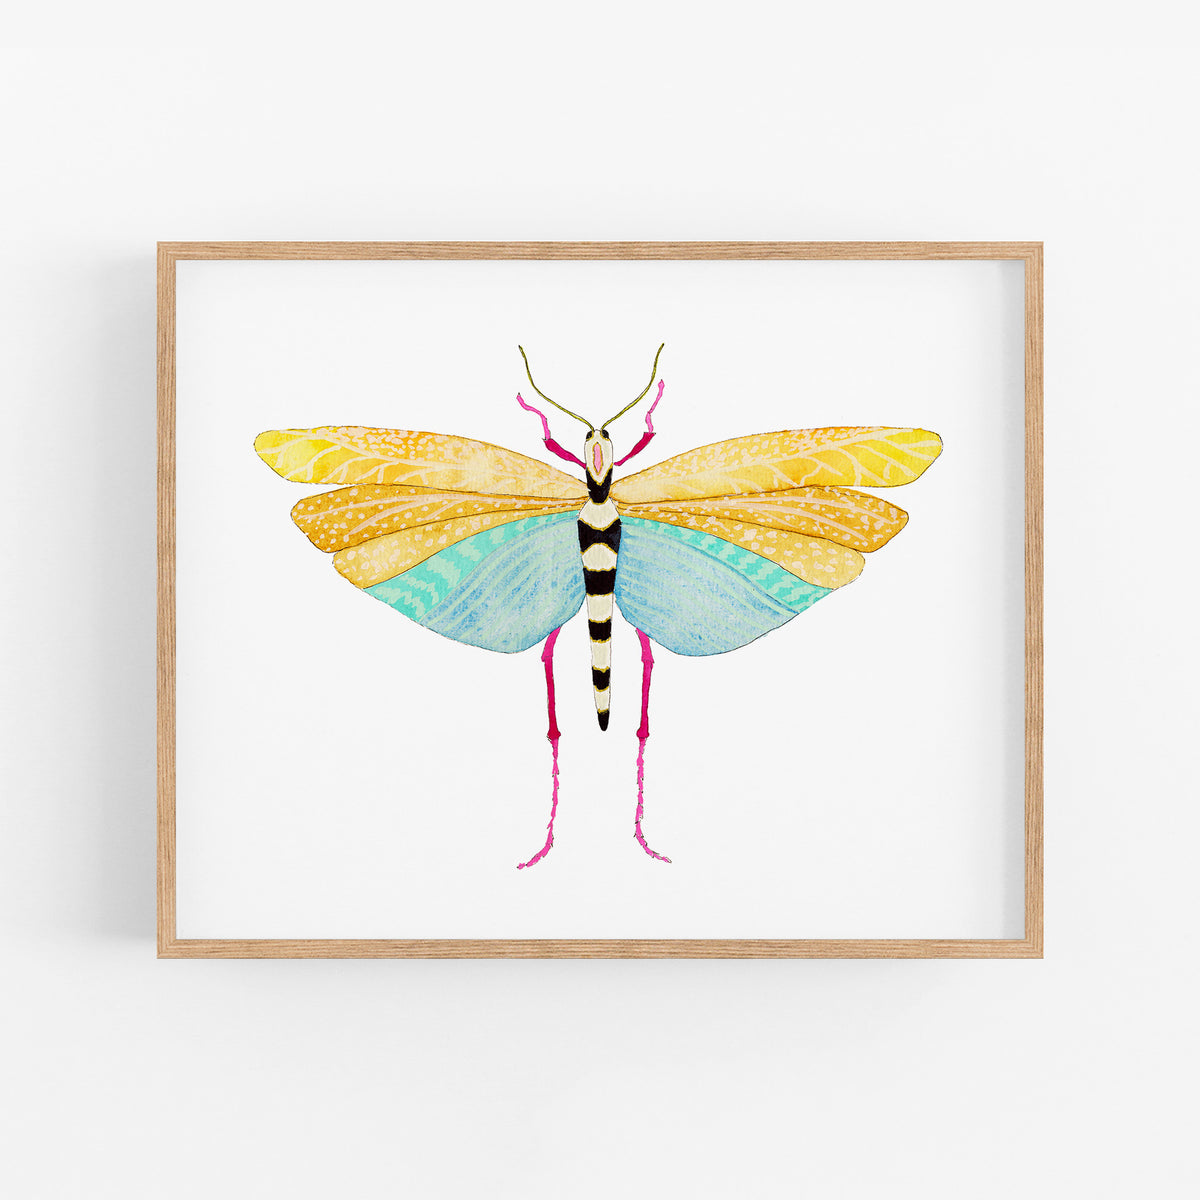 a painting of a yellow and blue insect on a white background